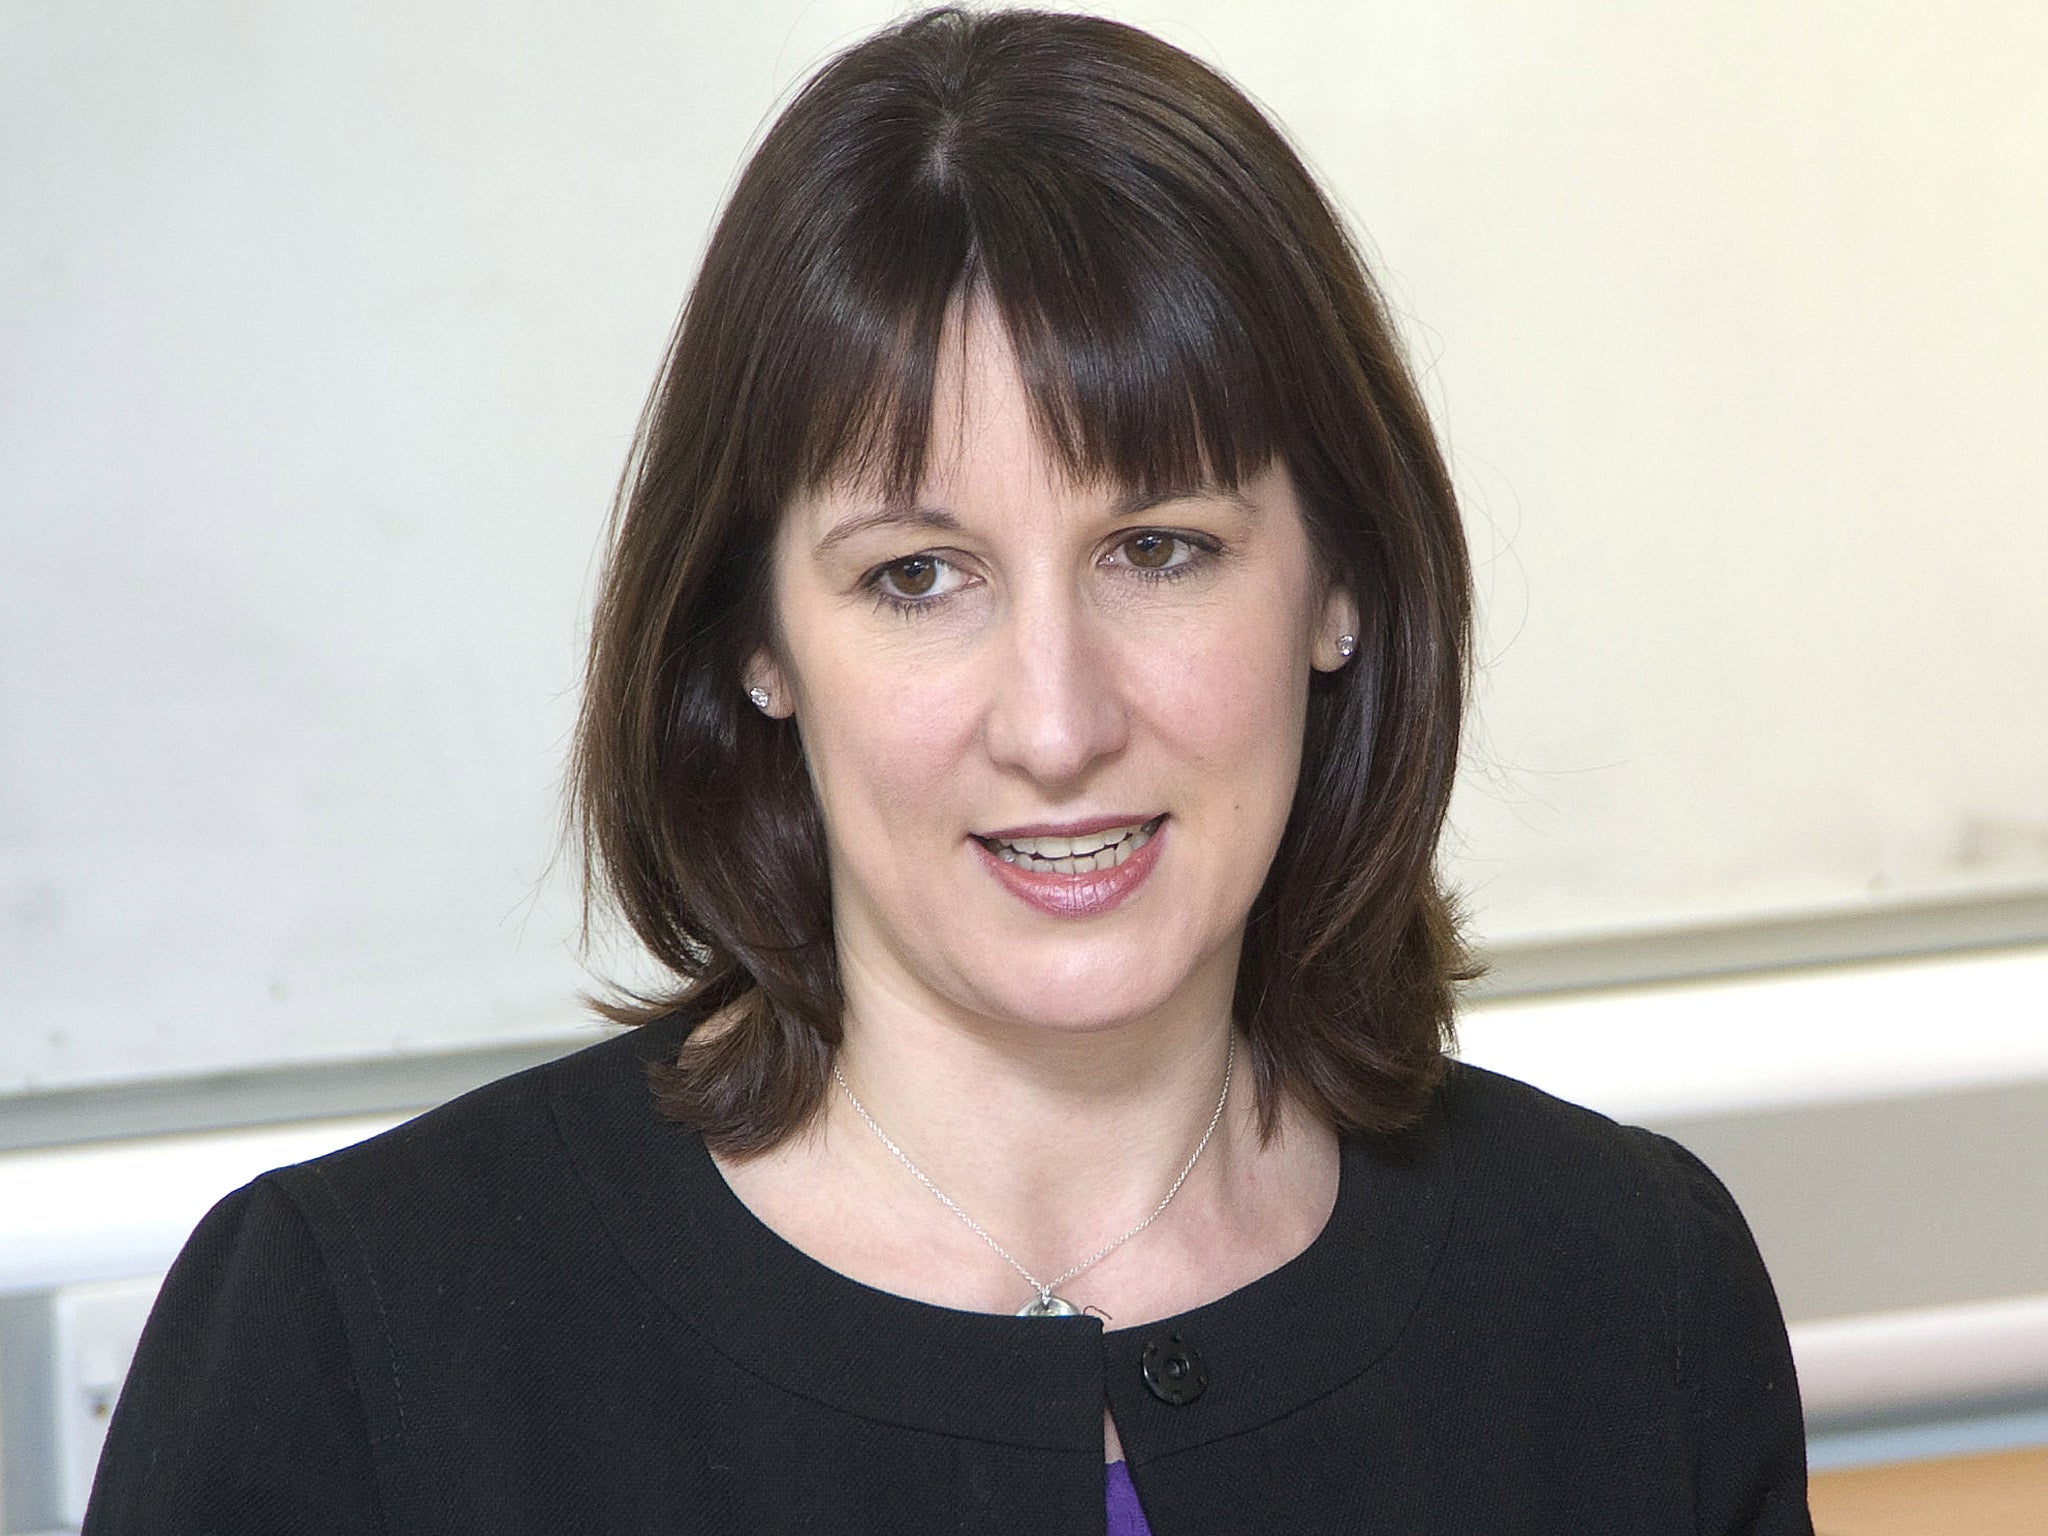 Rachel Reeves said the work capability assessment 'humiliates' disabled people